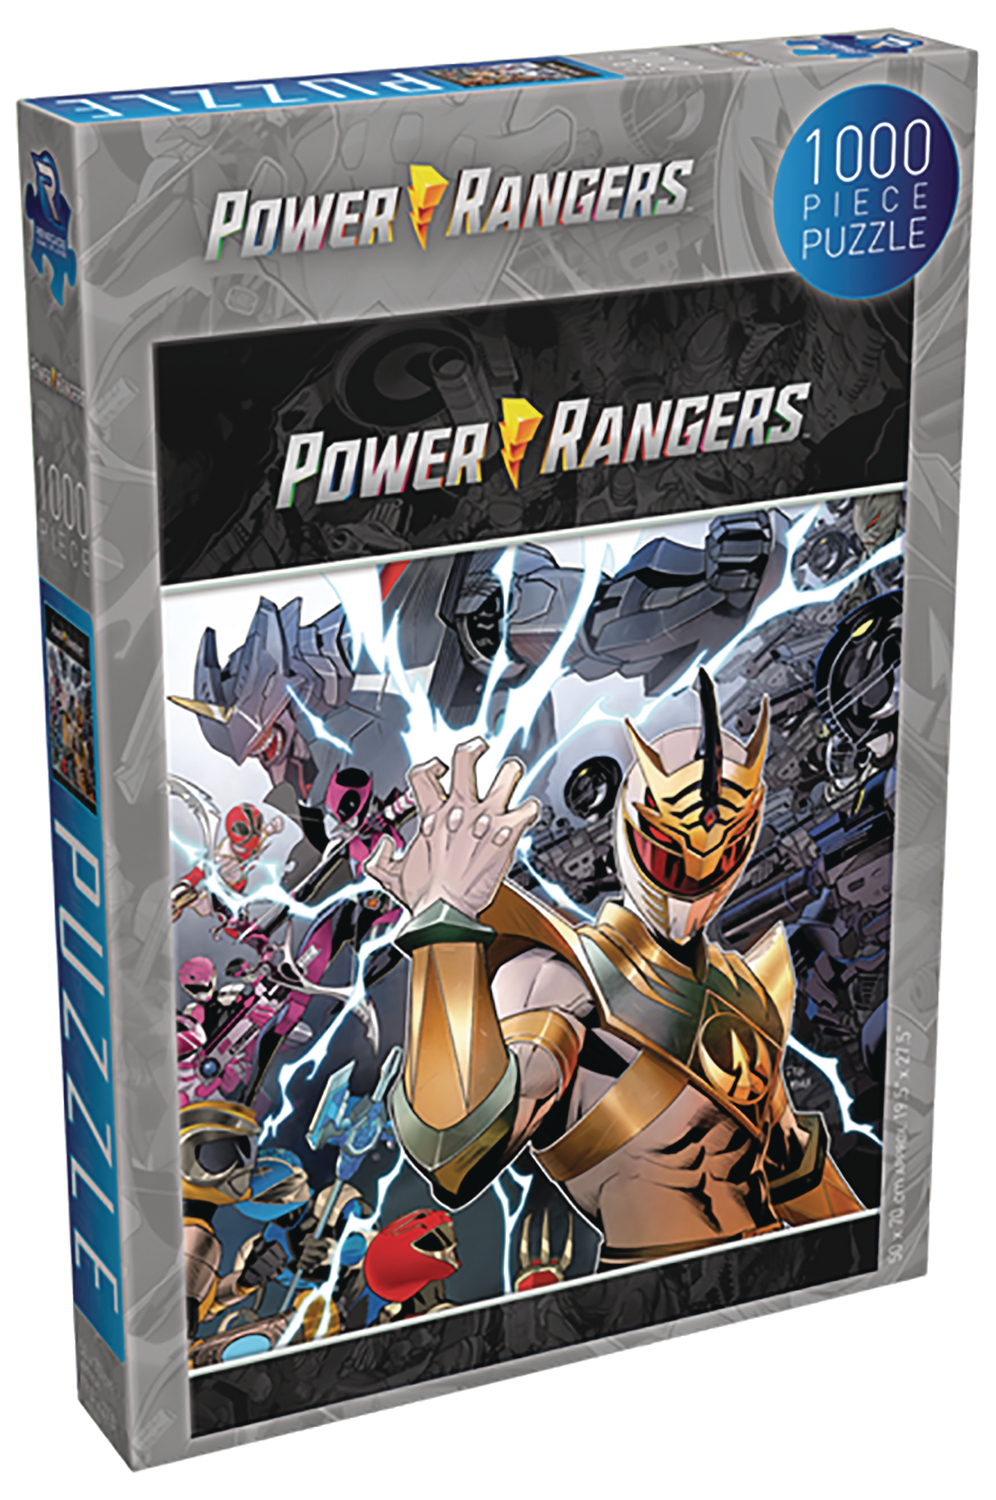 Power Rangers Shattered Grid 1000 Piece Puzzle